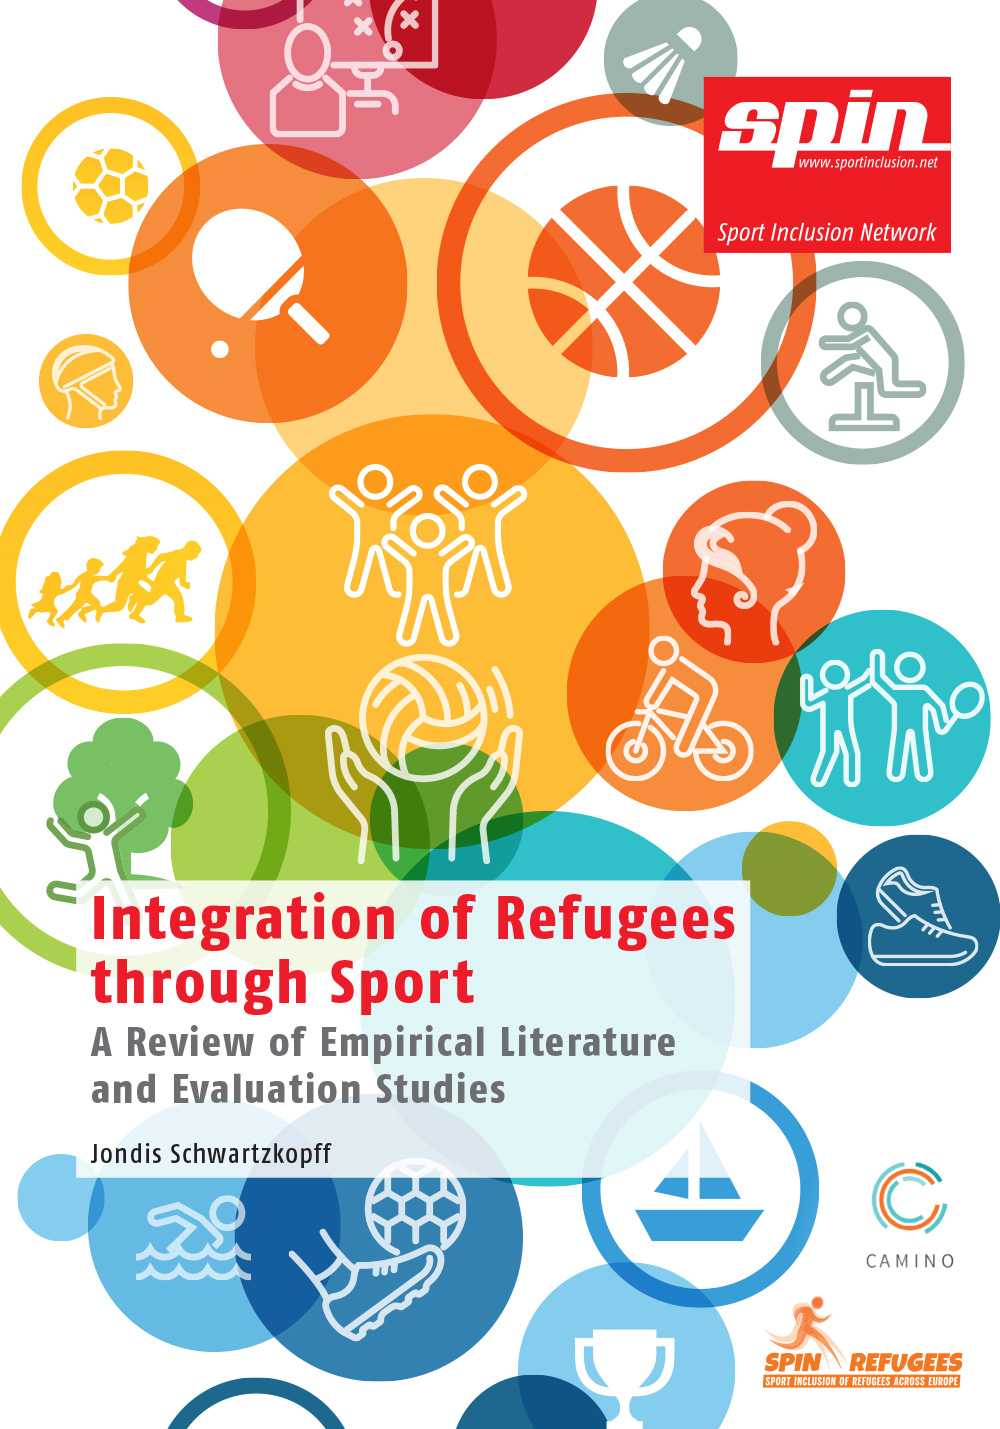 Integration of Refugees through Sport – A Review of Empirical Literature and Evaluation Studies